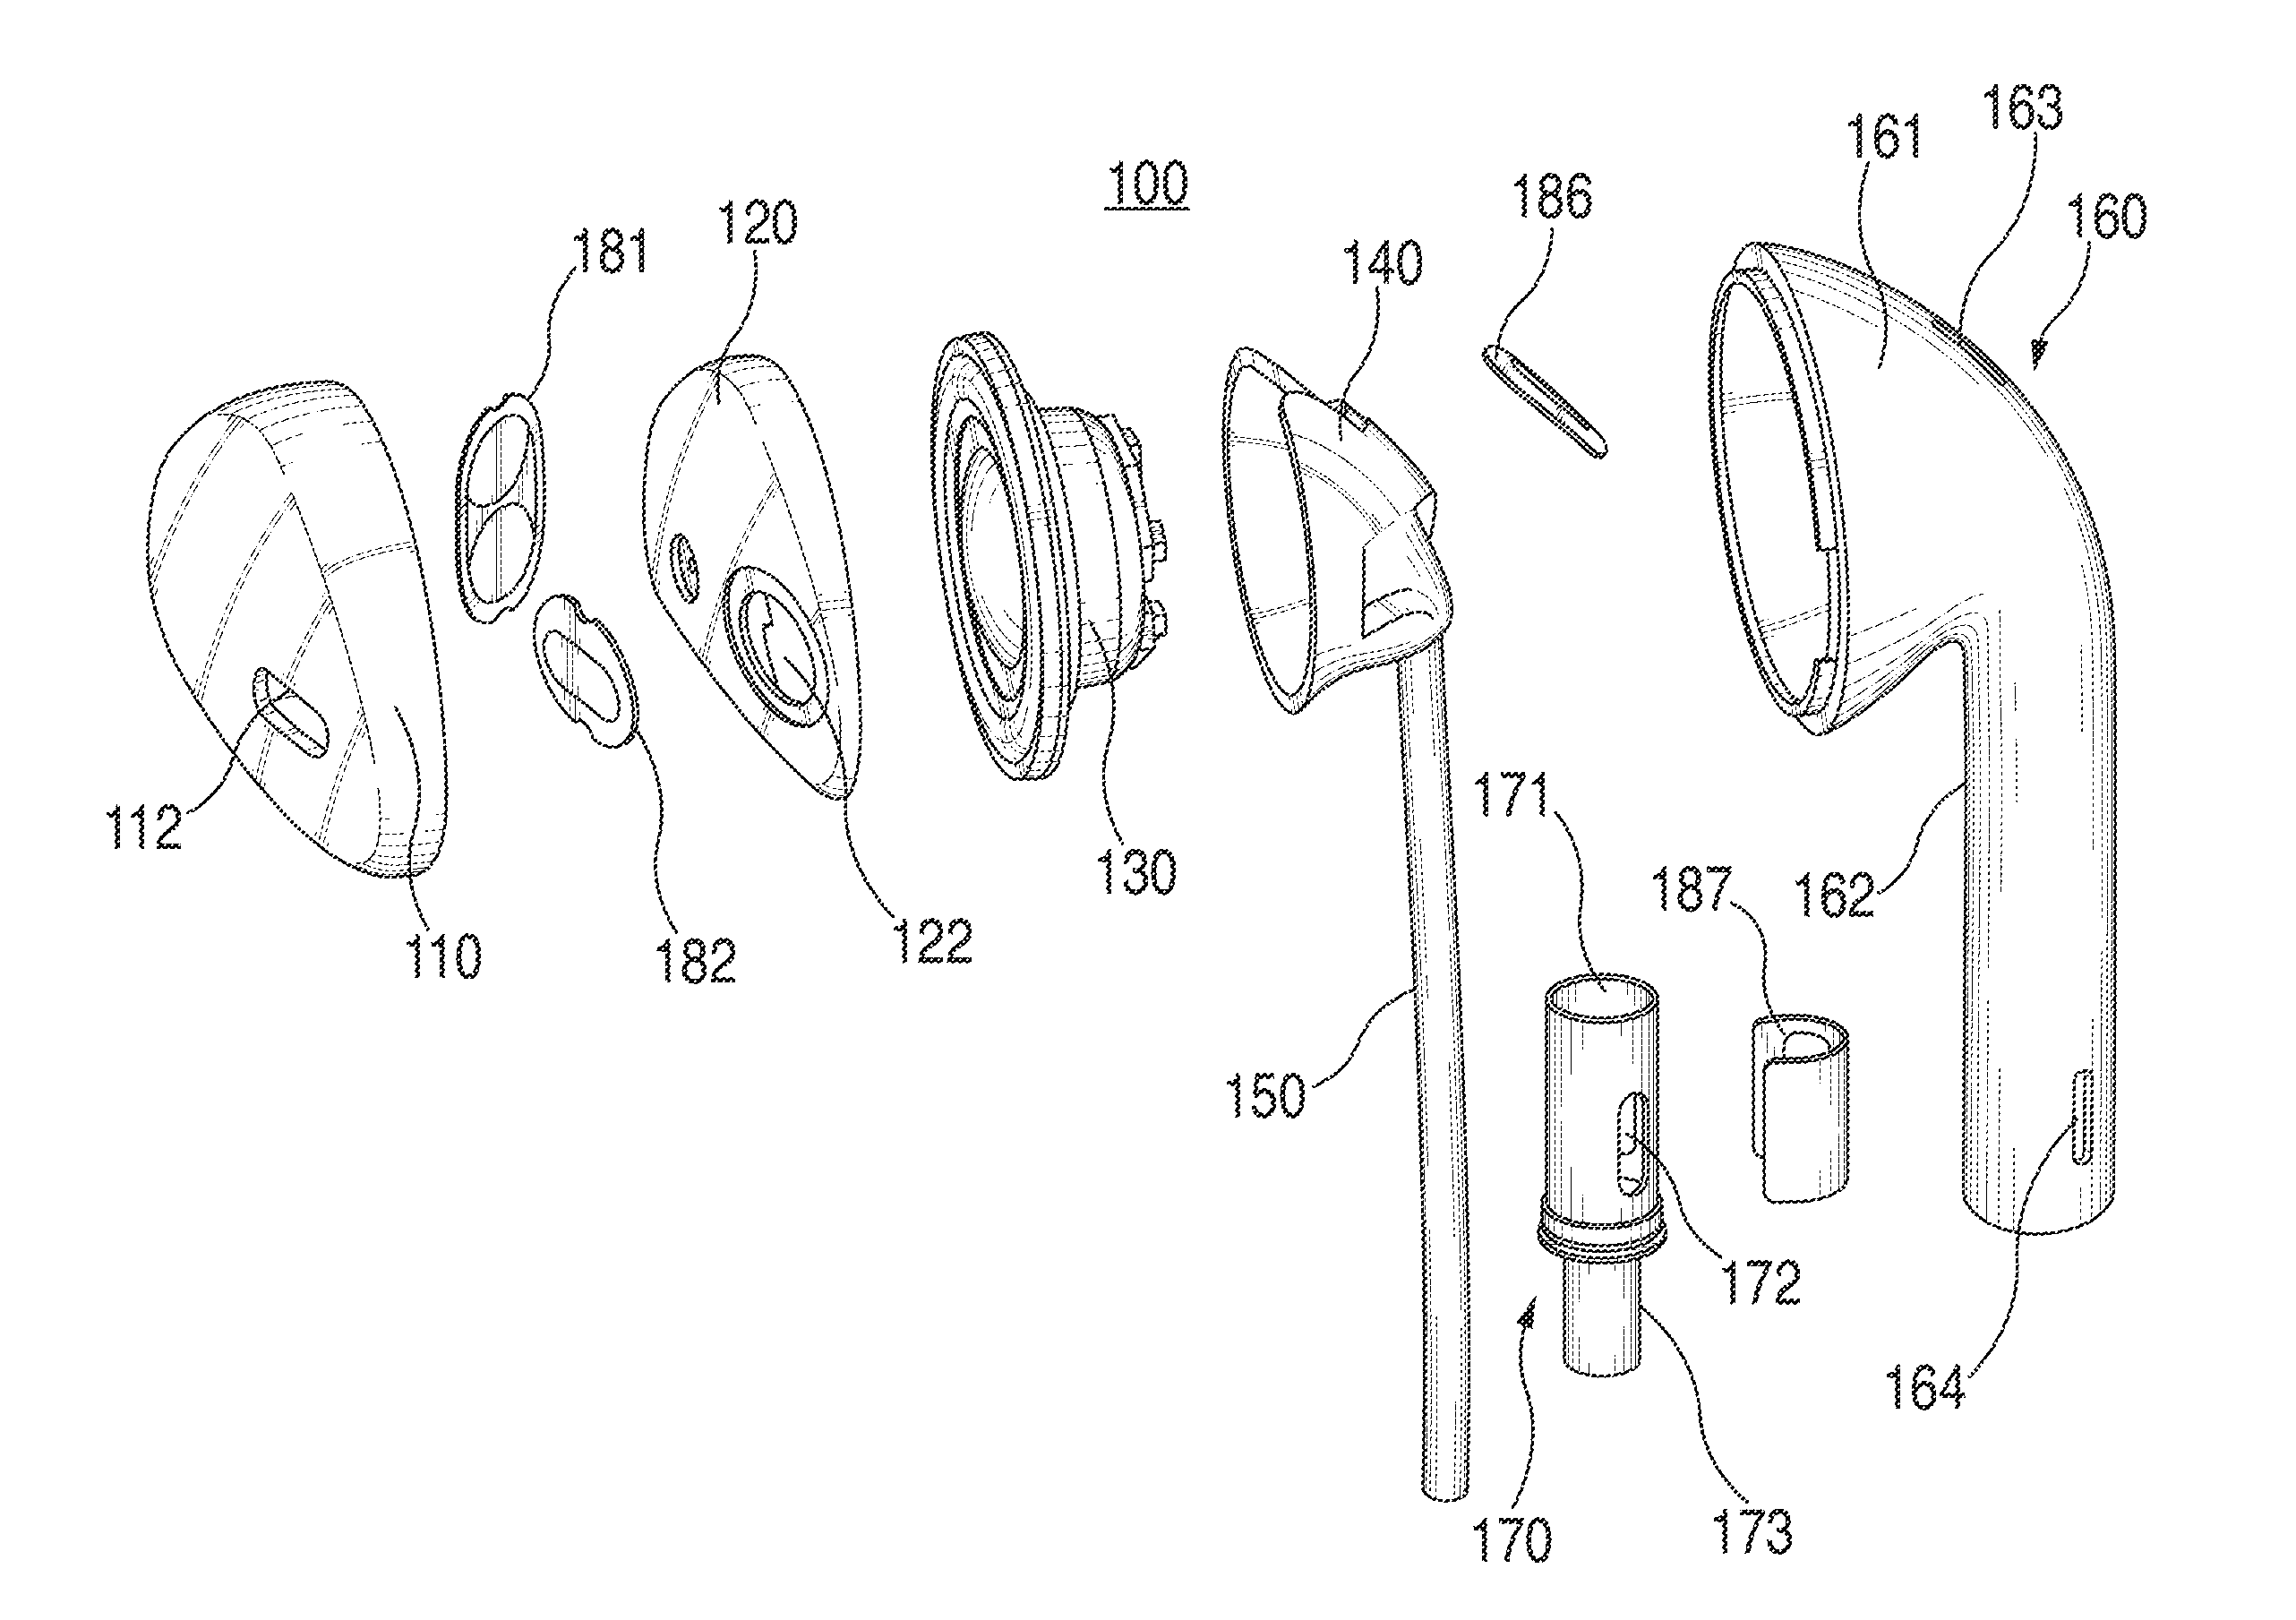 Systems and methods for assembling non-occluding earbuds